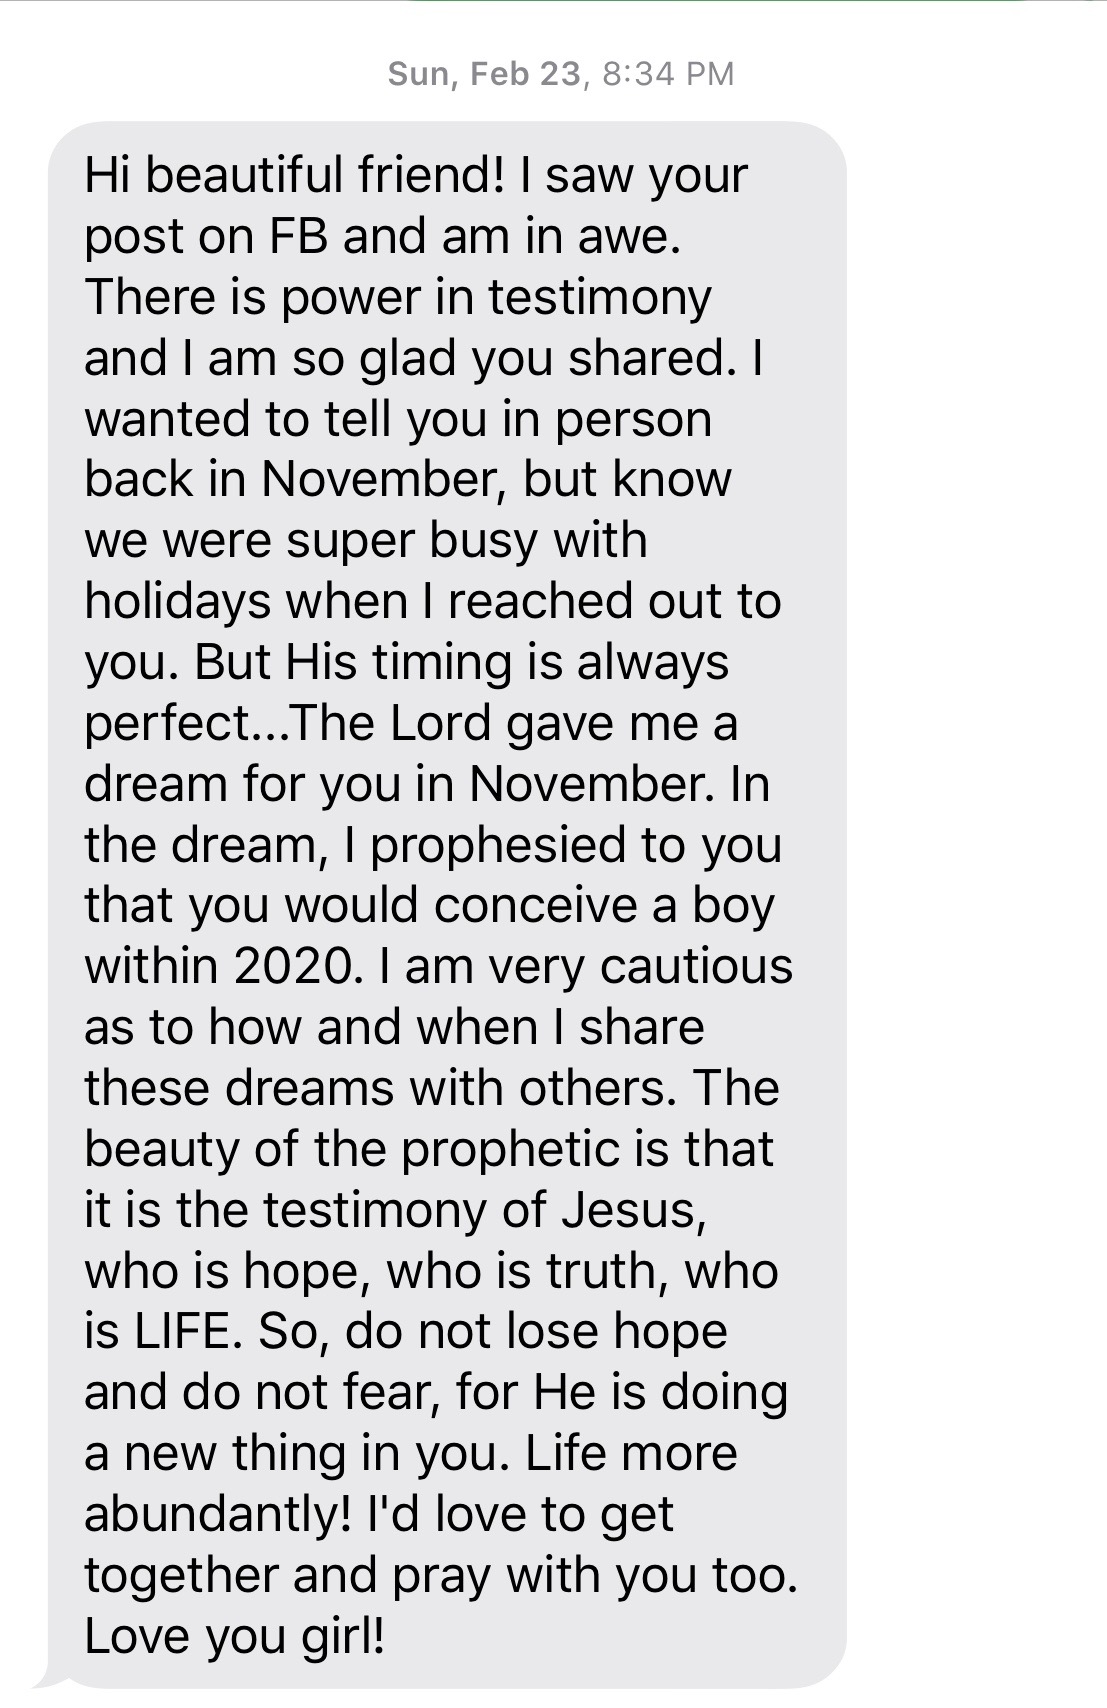 Text message from friend about God's promise